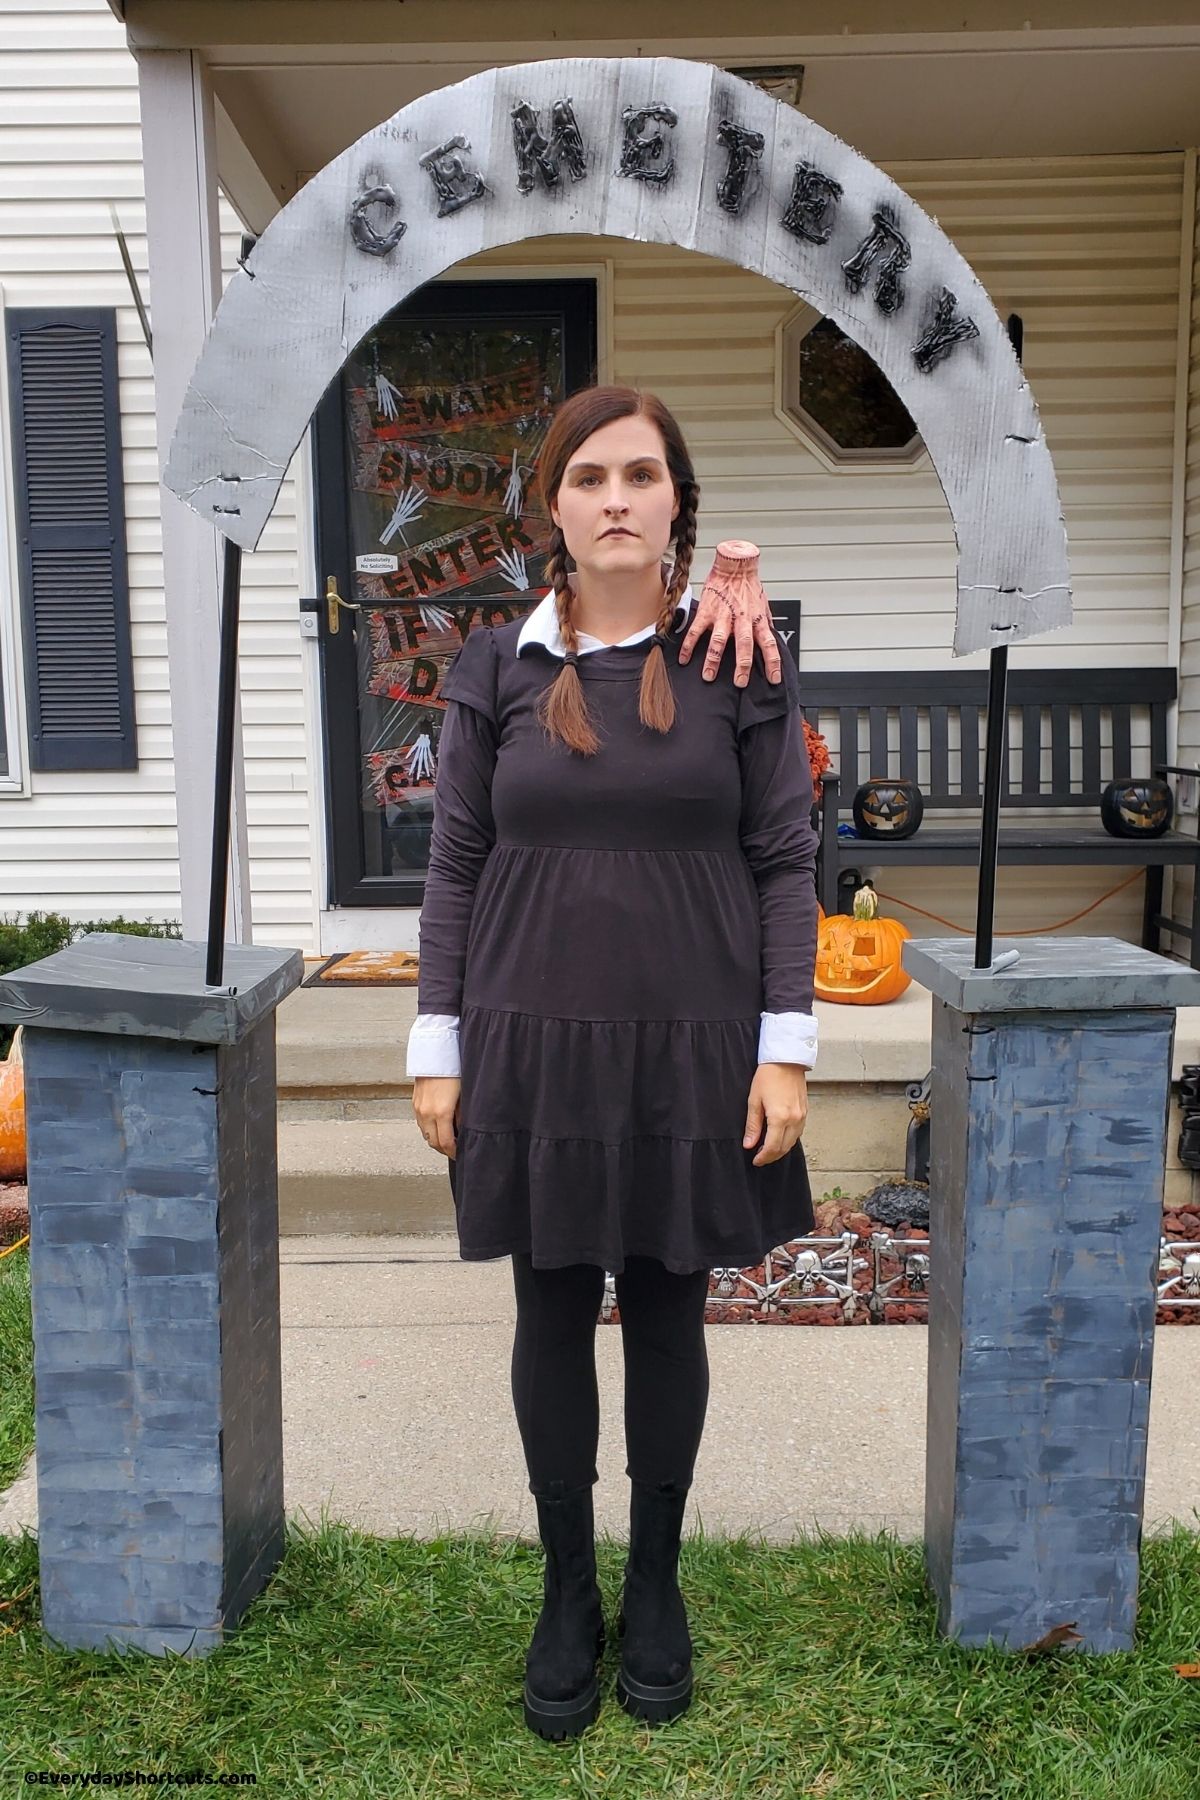 In a Wednesday Addams costume standing under homemade cemetery entrance